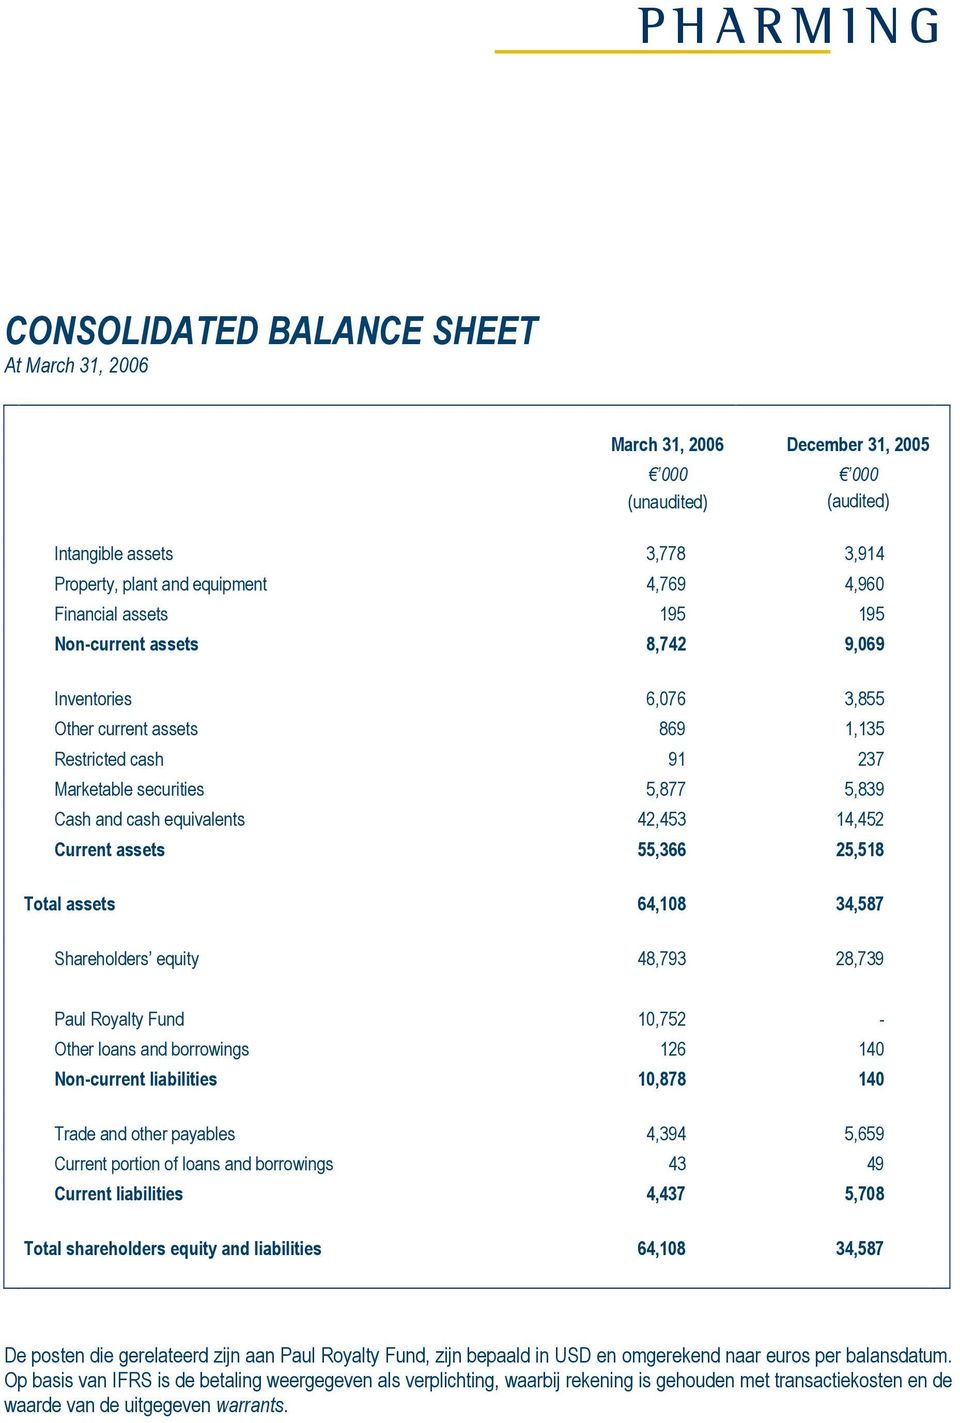 assets 55,366 25,518 Total assets 64,108 34,587 Shareholders equity 48,793 28,739 Paul Royalty Fund 10,752 - Other loans and borrowings 126 140 Non-current liabilities 10,878 140 Trade and other